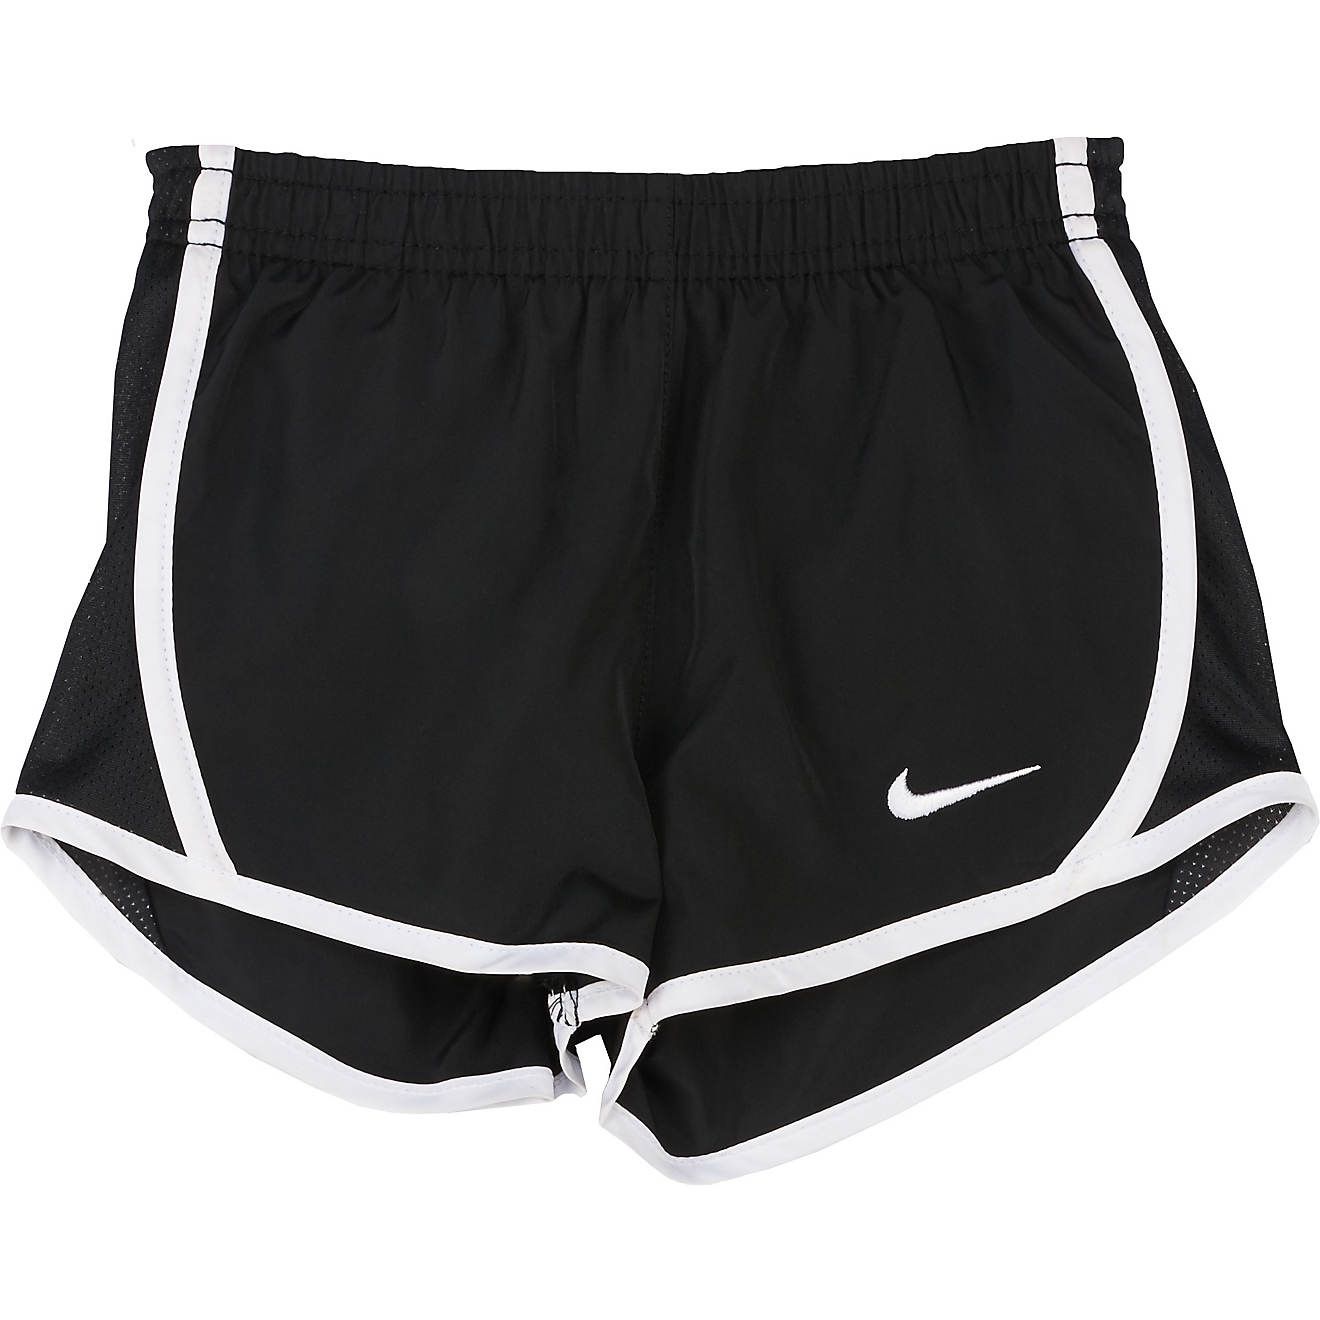 Nike Toddler Girls' 2T - 6X Dry Tempo Shorts | Academy Sports + Outdoor Affiliate